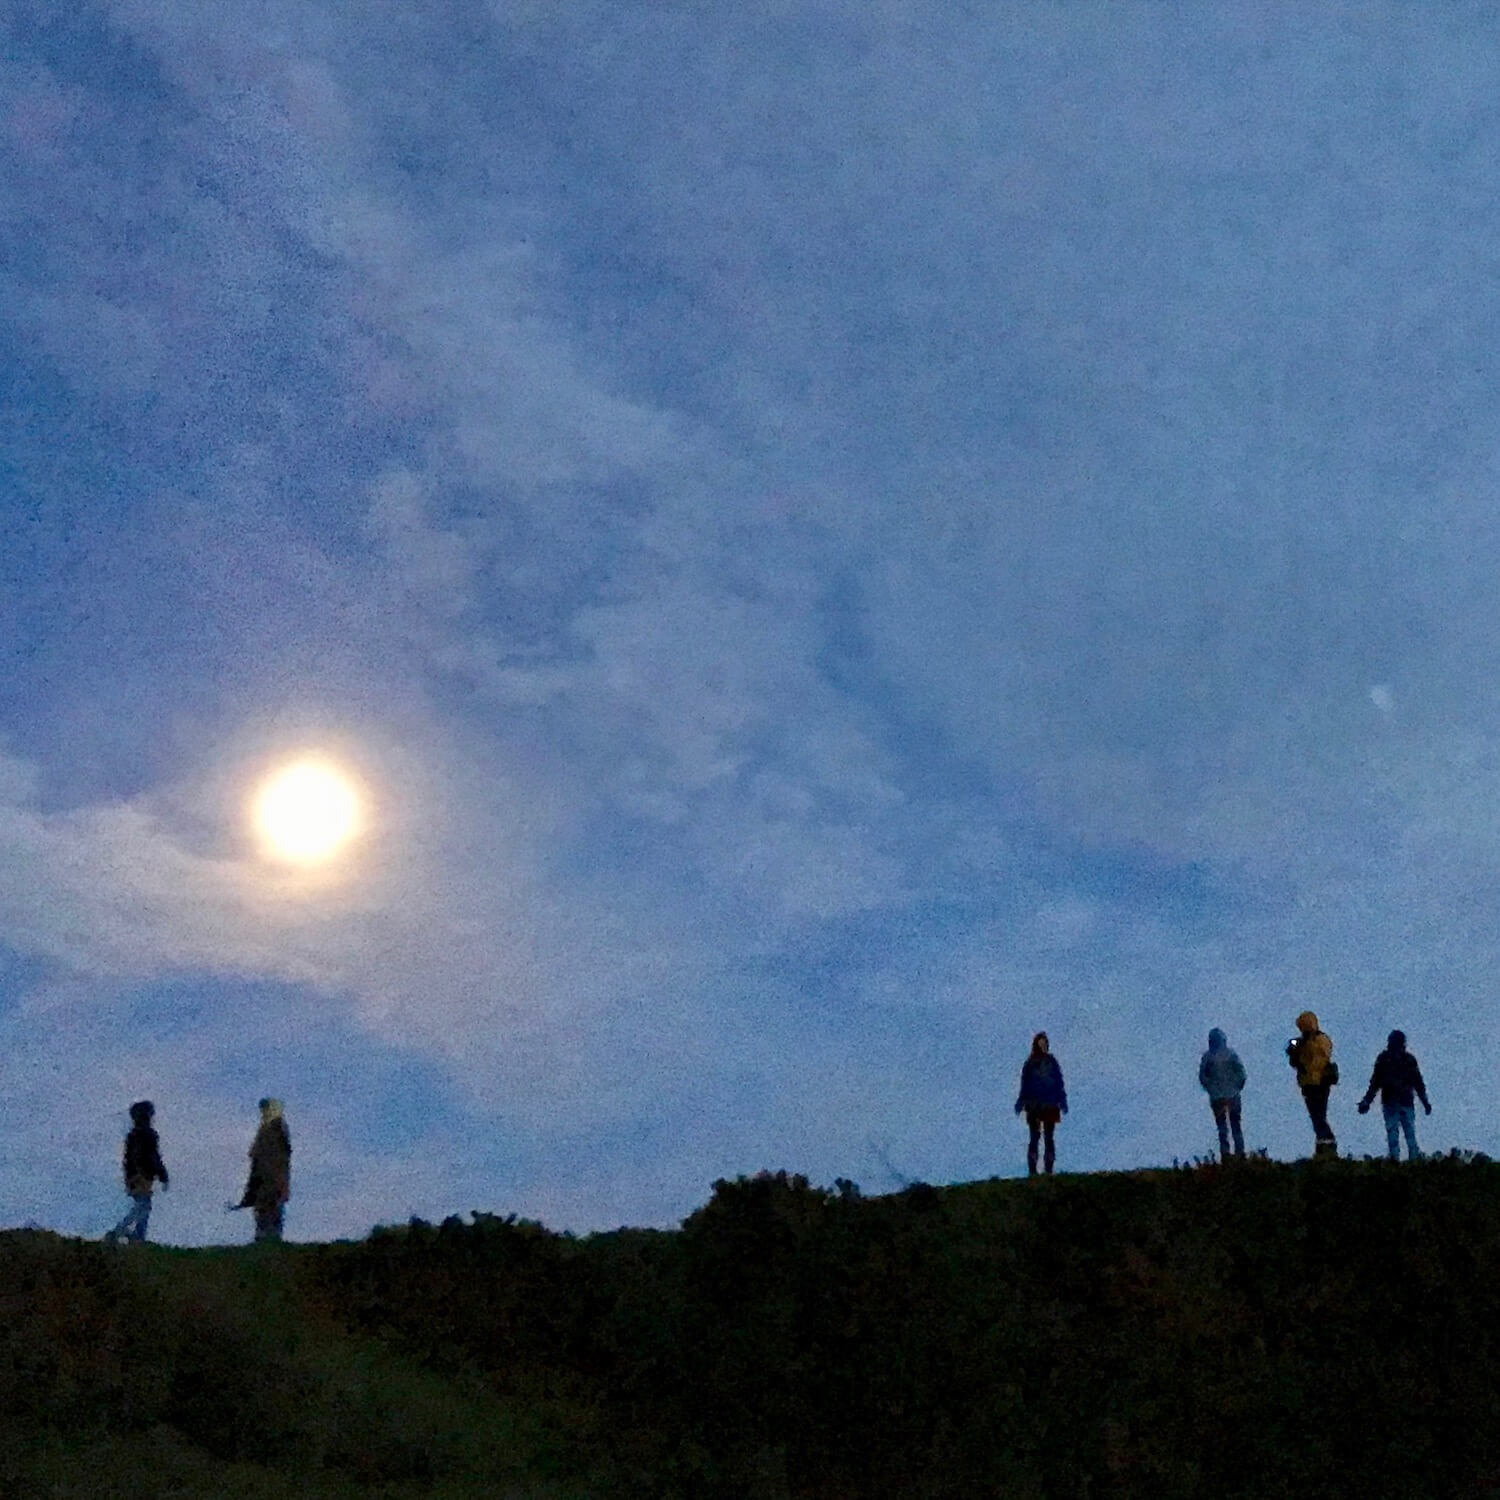 The moon rises over the sacred mound at Dowth on the eve of the longest night of the year. The glow creates a backdrop for six people standing atop the mound.